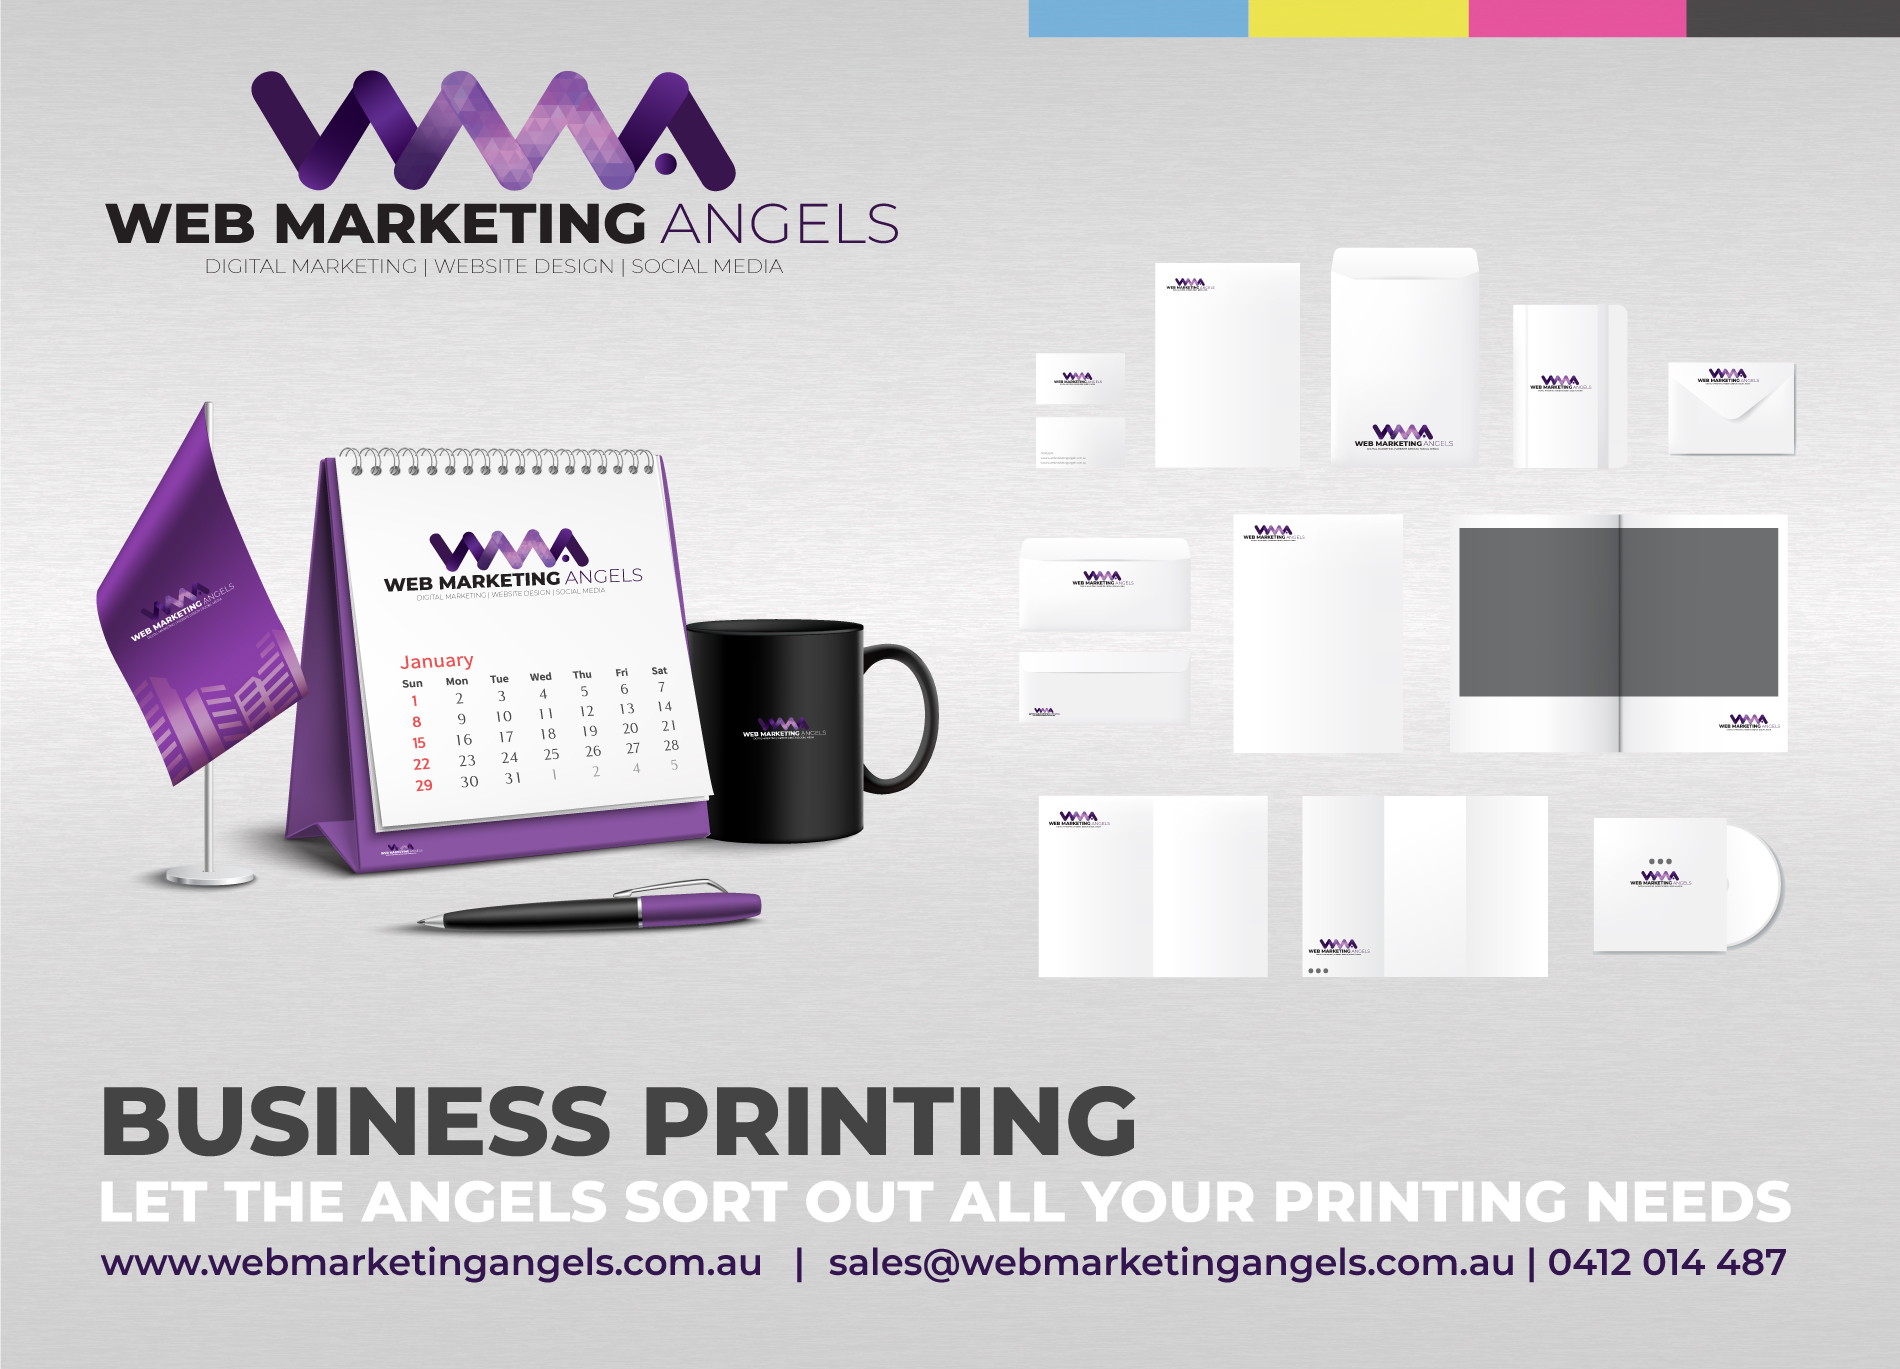 Web Marketing Angels - Business Printing Services